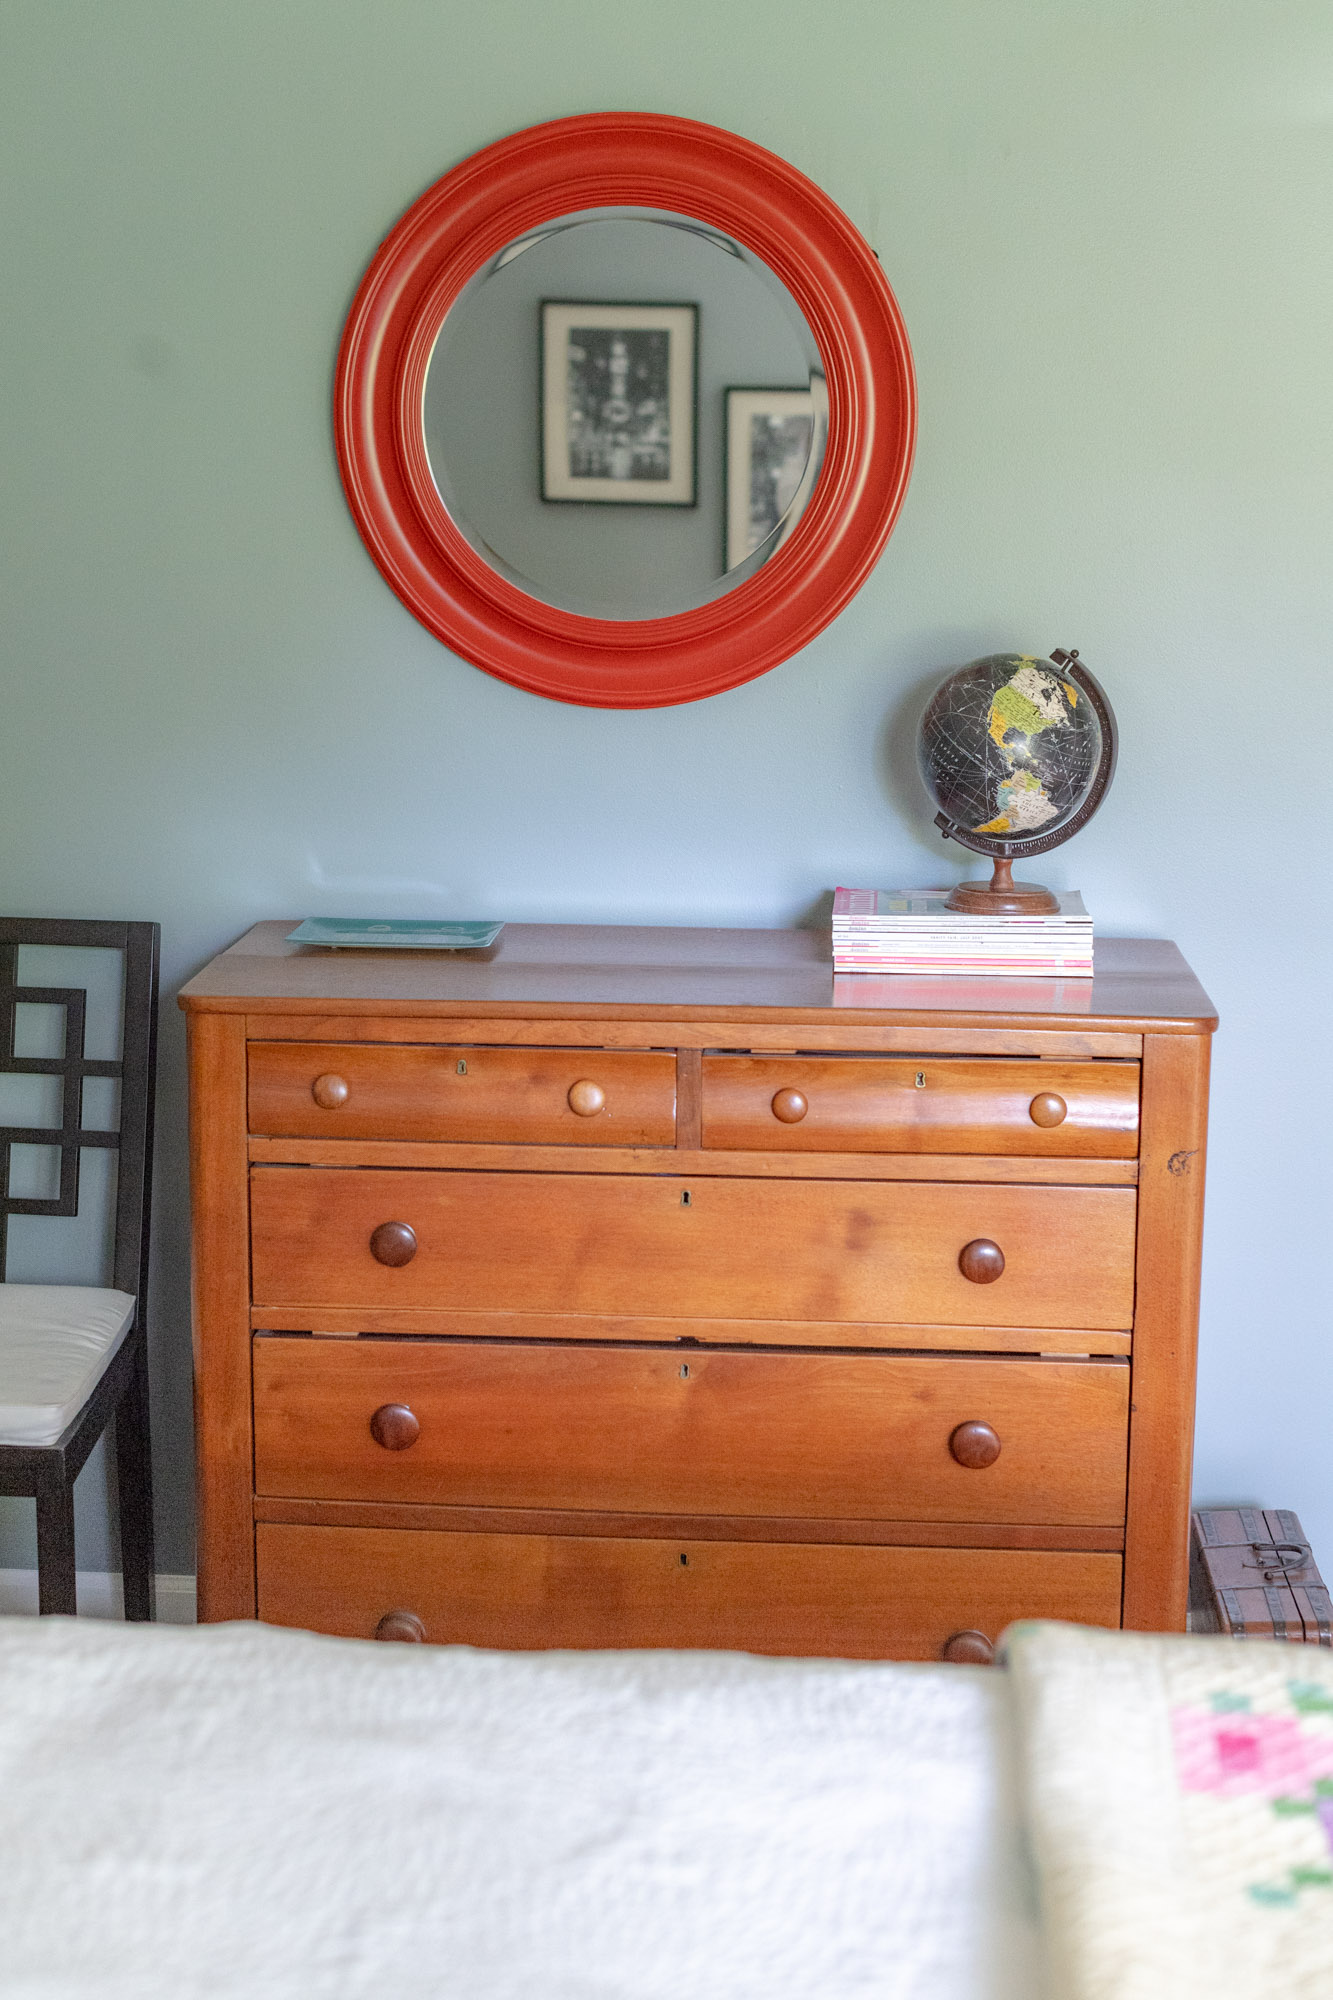 MMDH: Design Tips for Mirrors